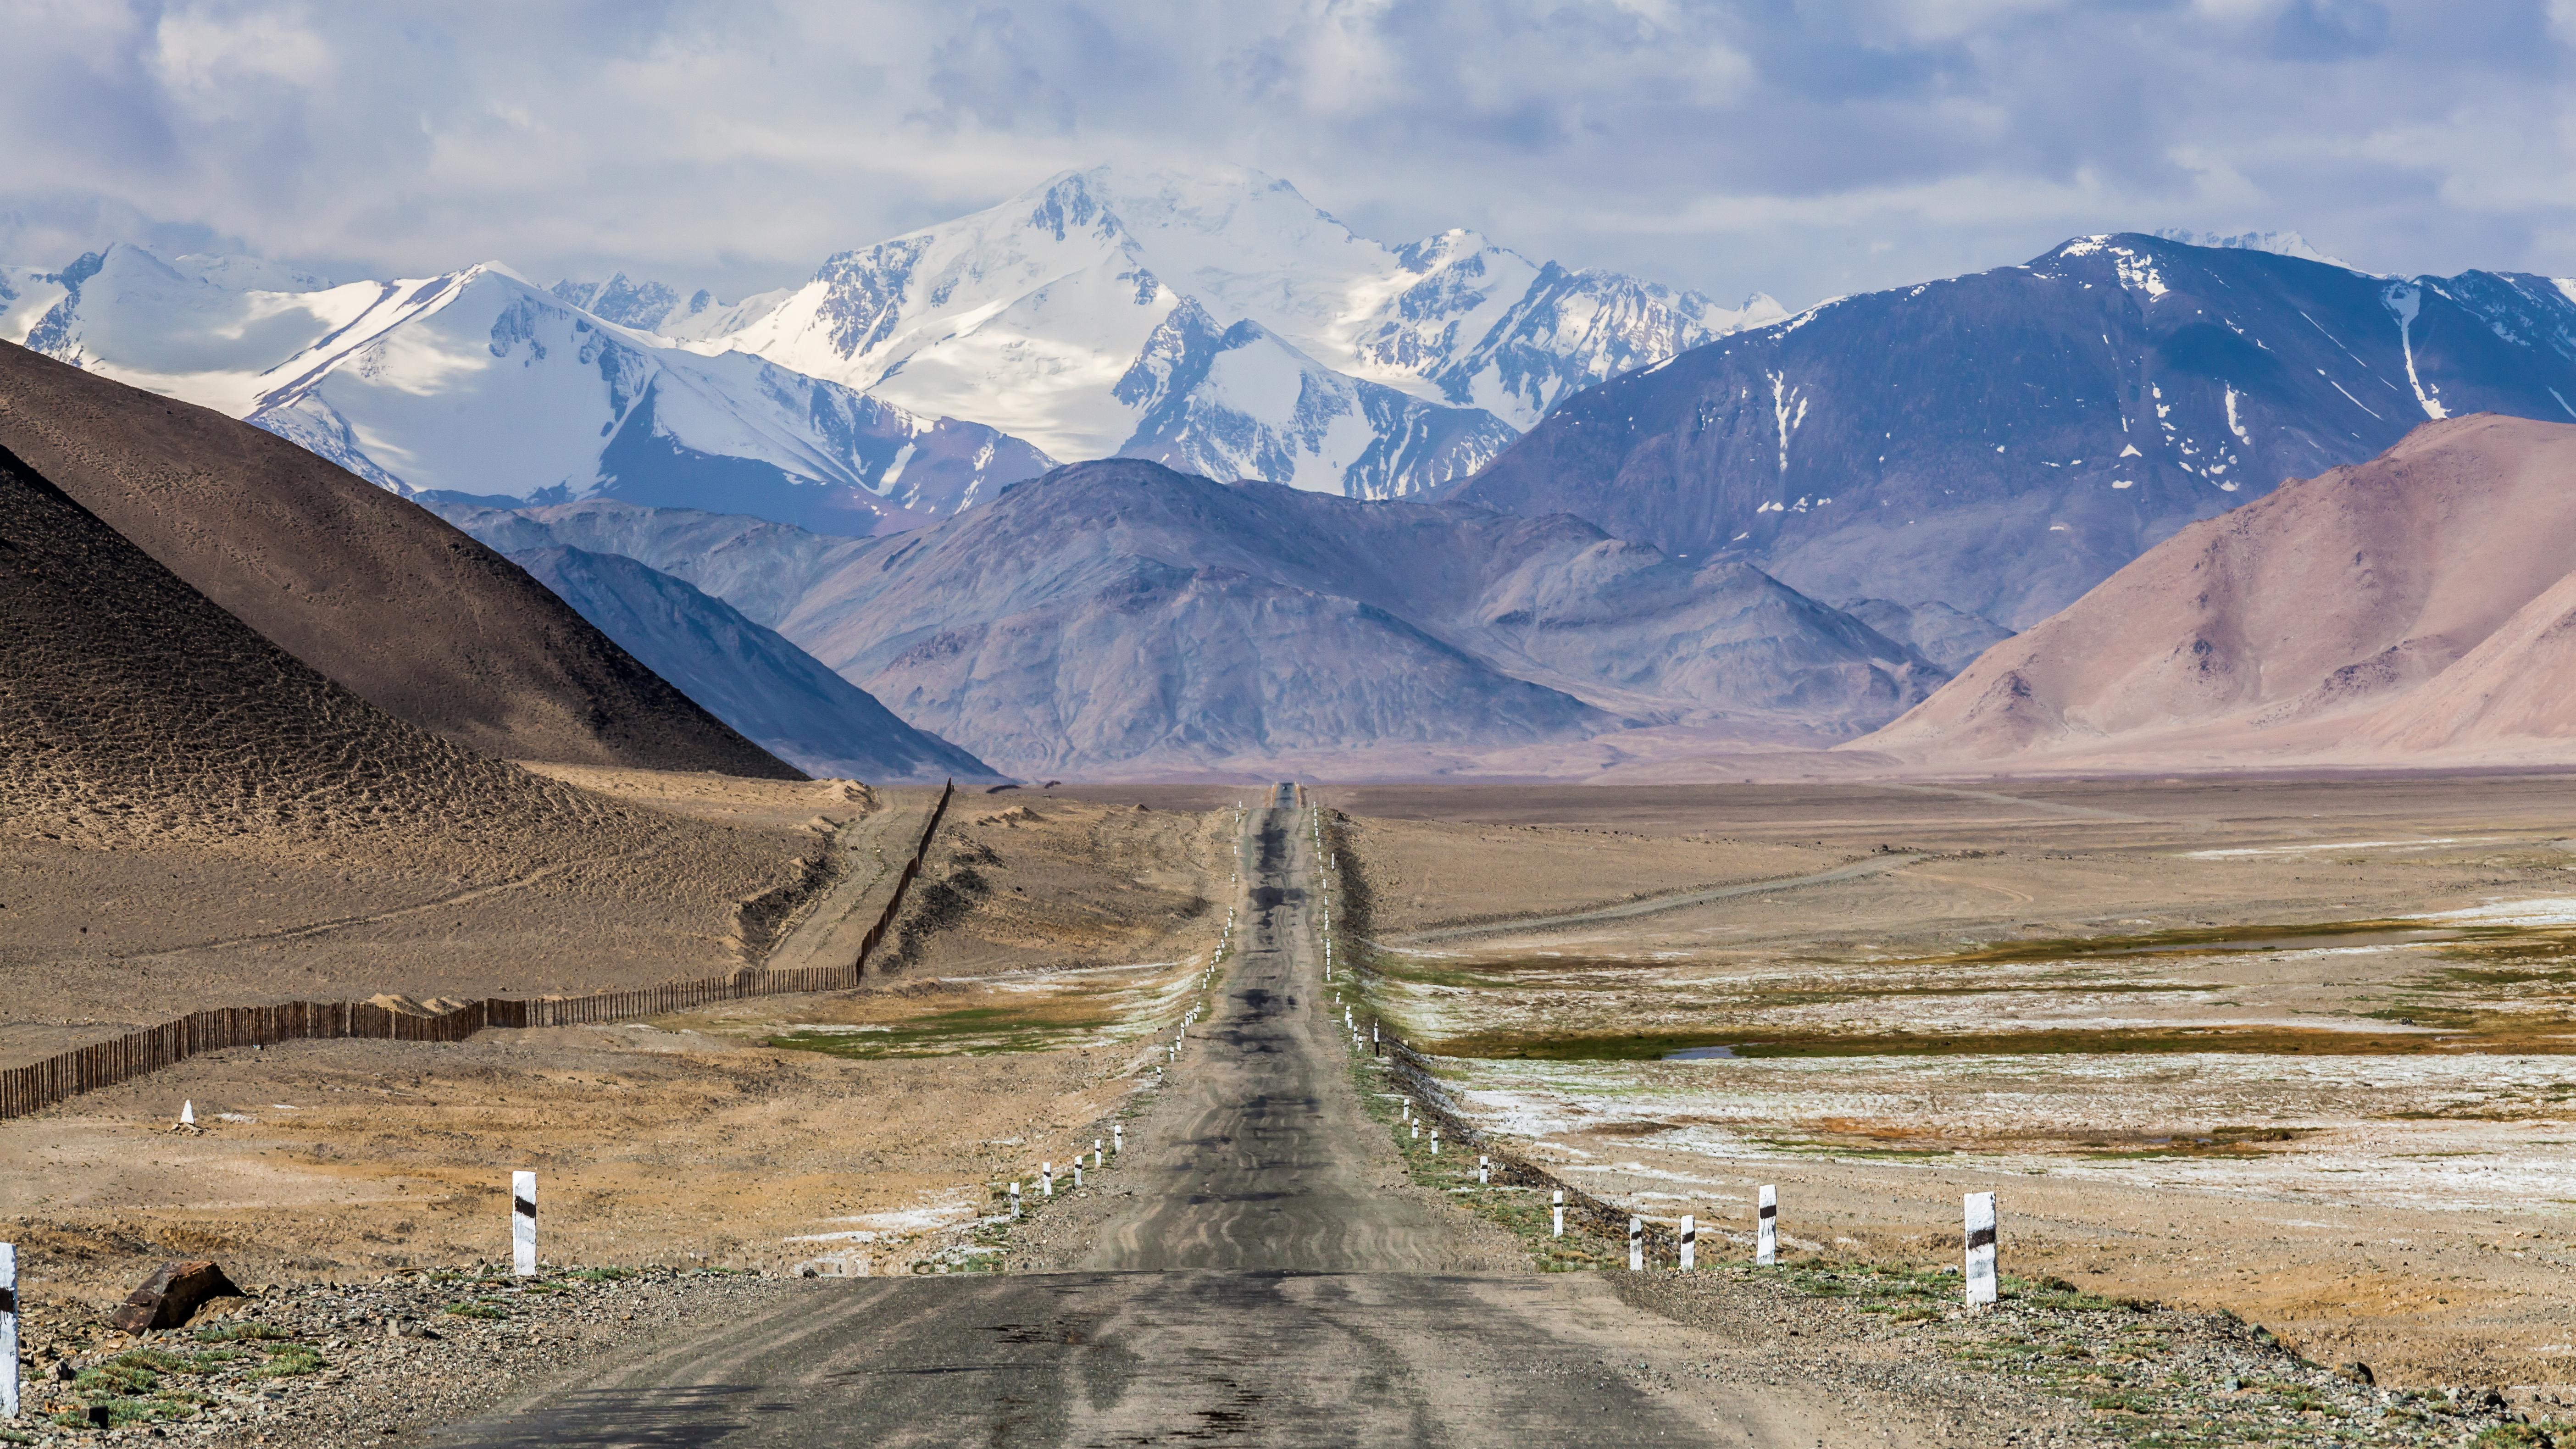 Mountain view and the Pamir highway - Photo credit: NOWAK LUKASZ